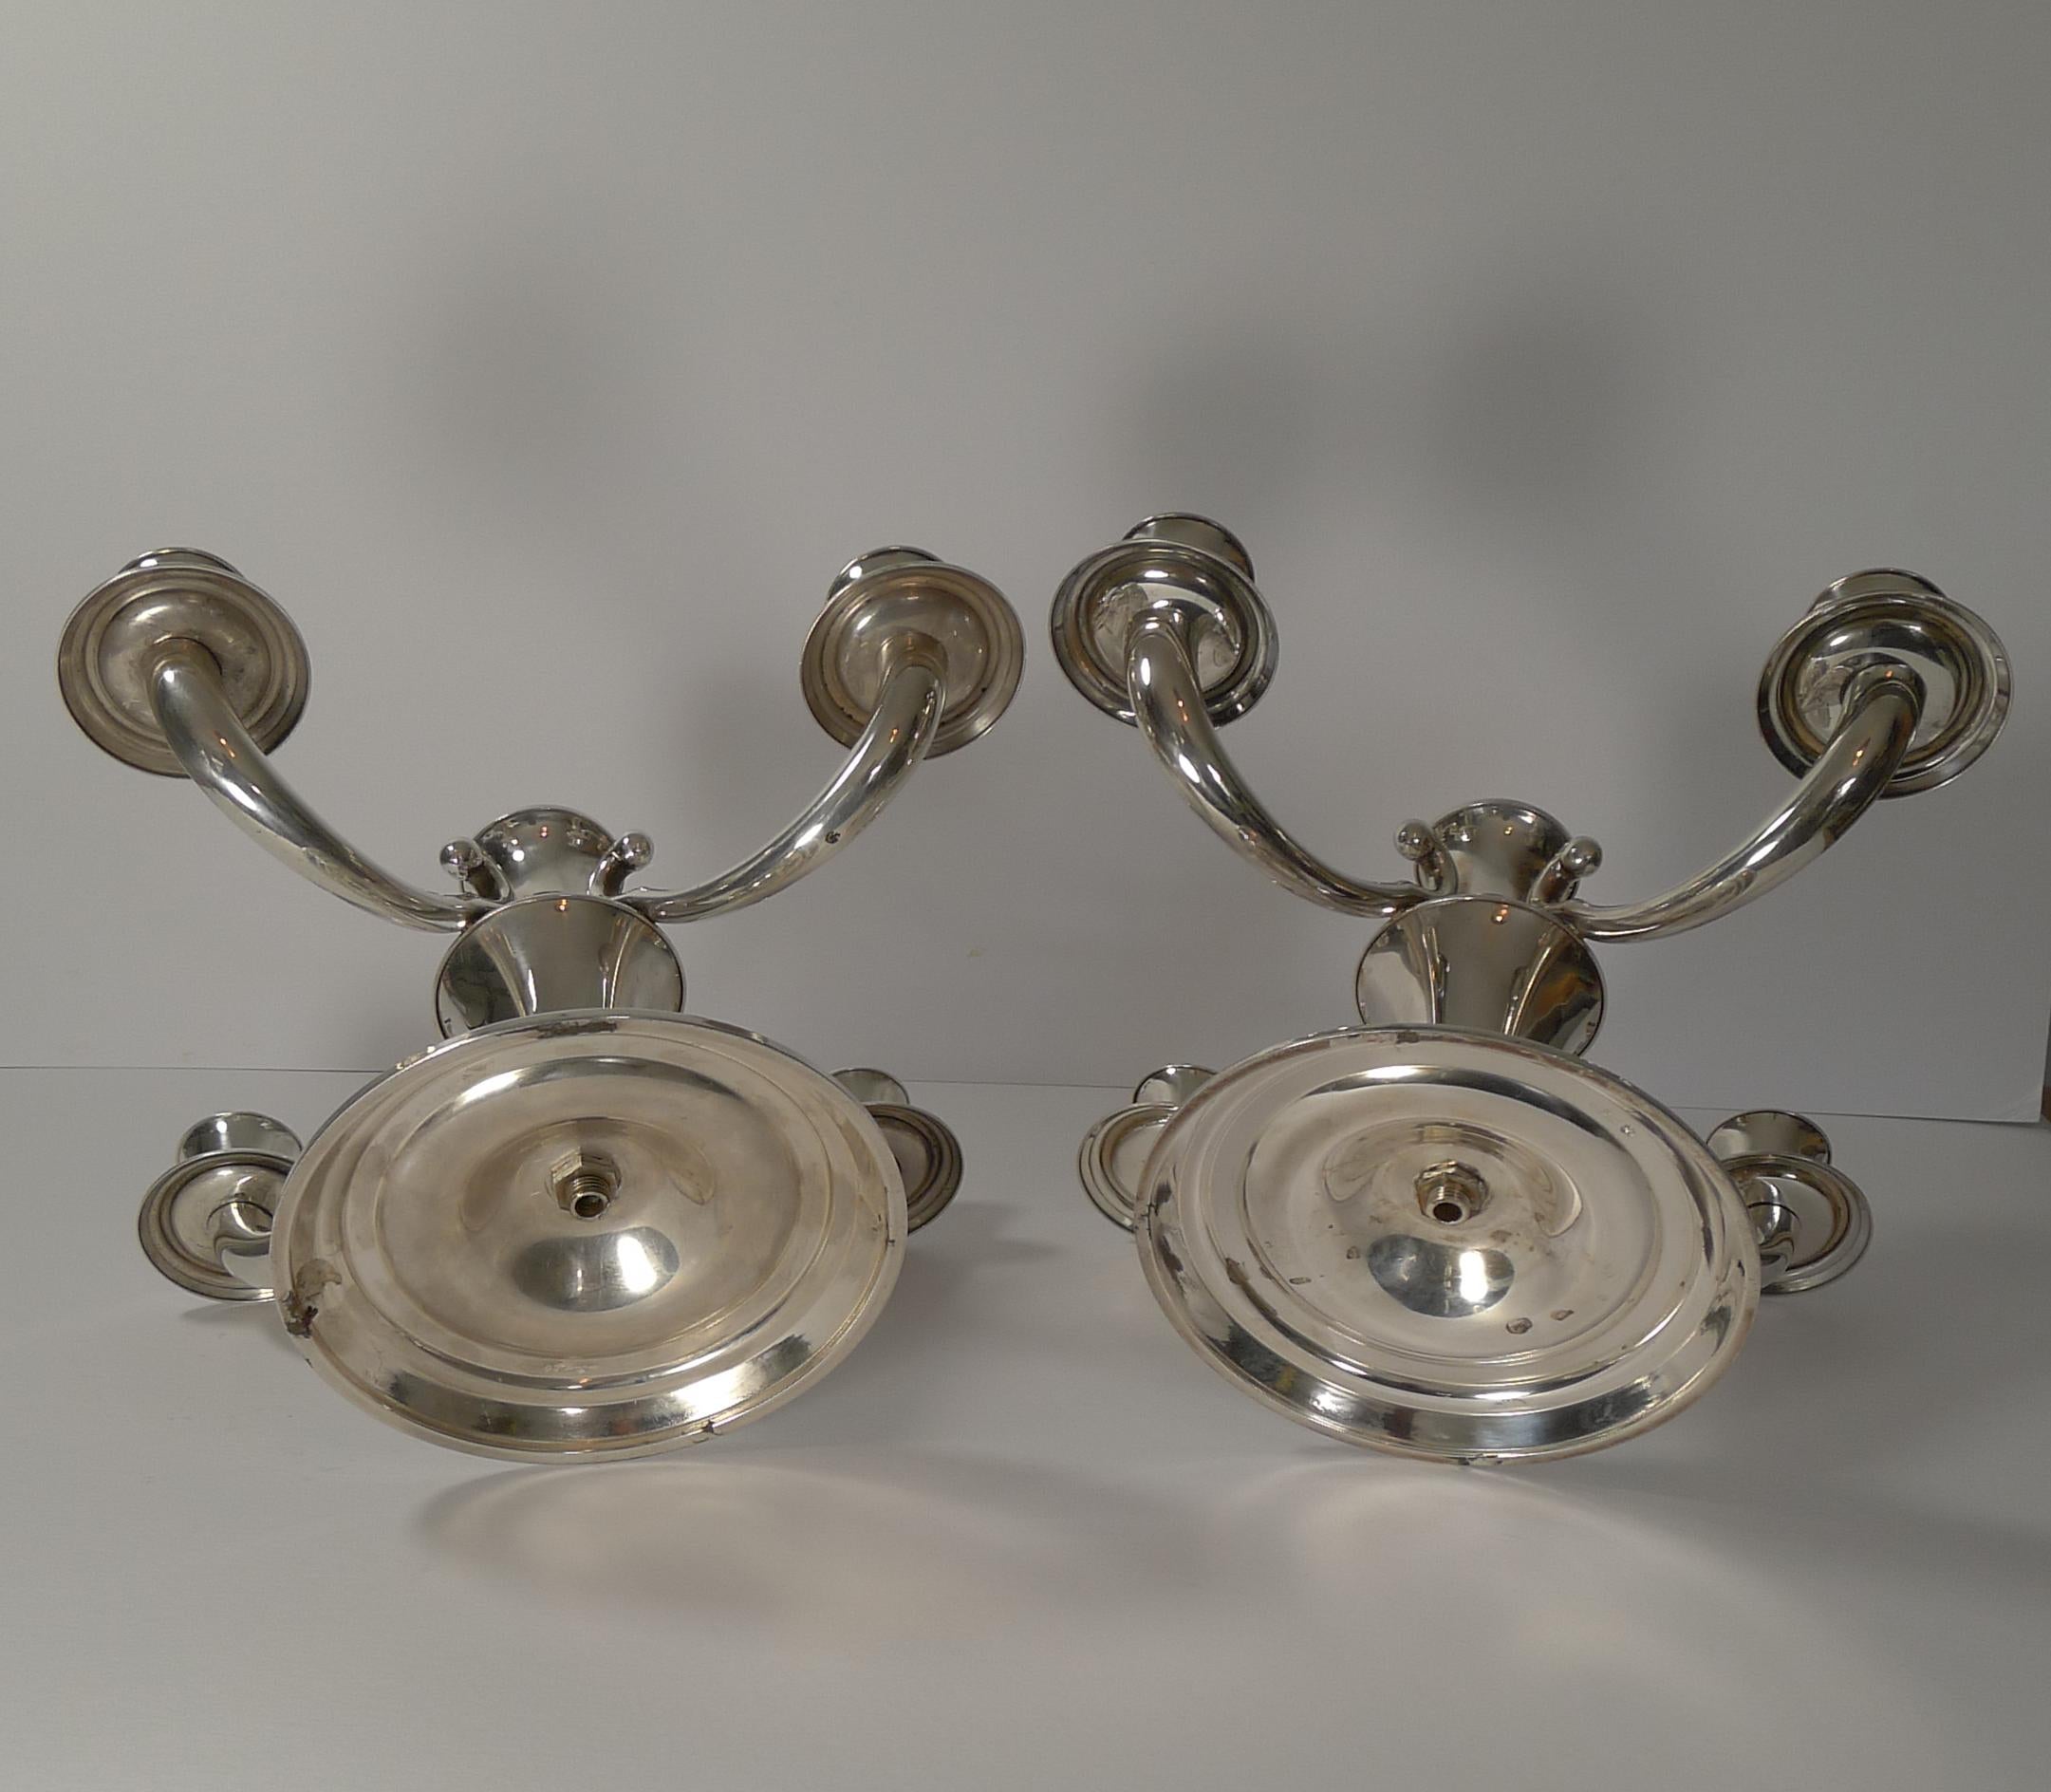 Mid-20th Century Pair of French Art Deco Candelabra in Silver Plate by Ravinet d'Enfert